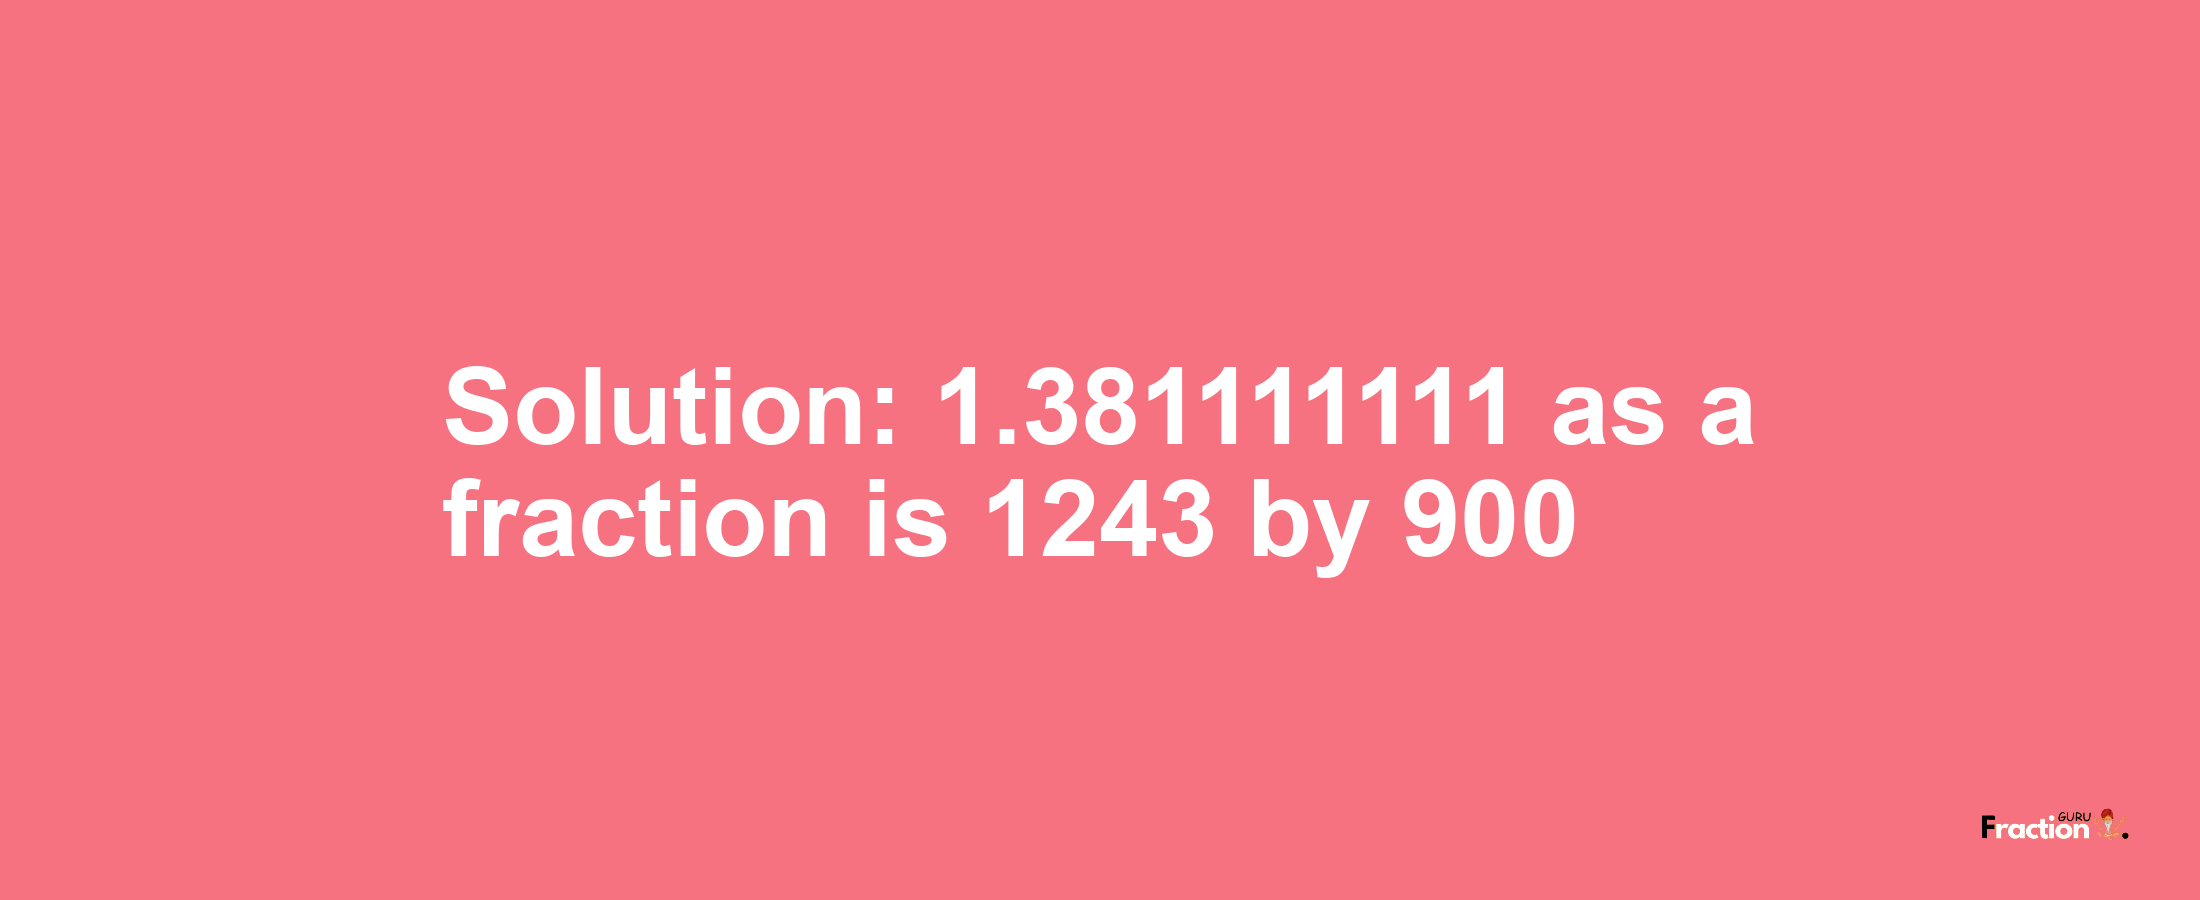 Solution:1.381111111 as a fraction is 1243/900